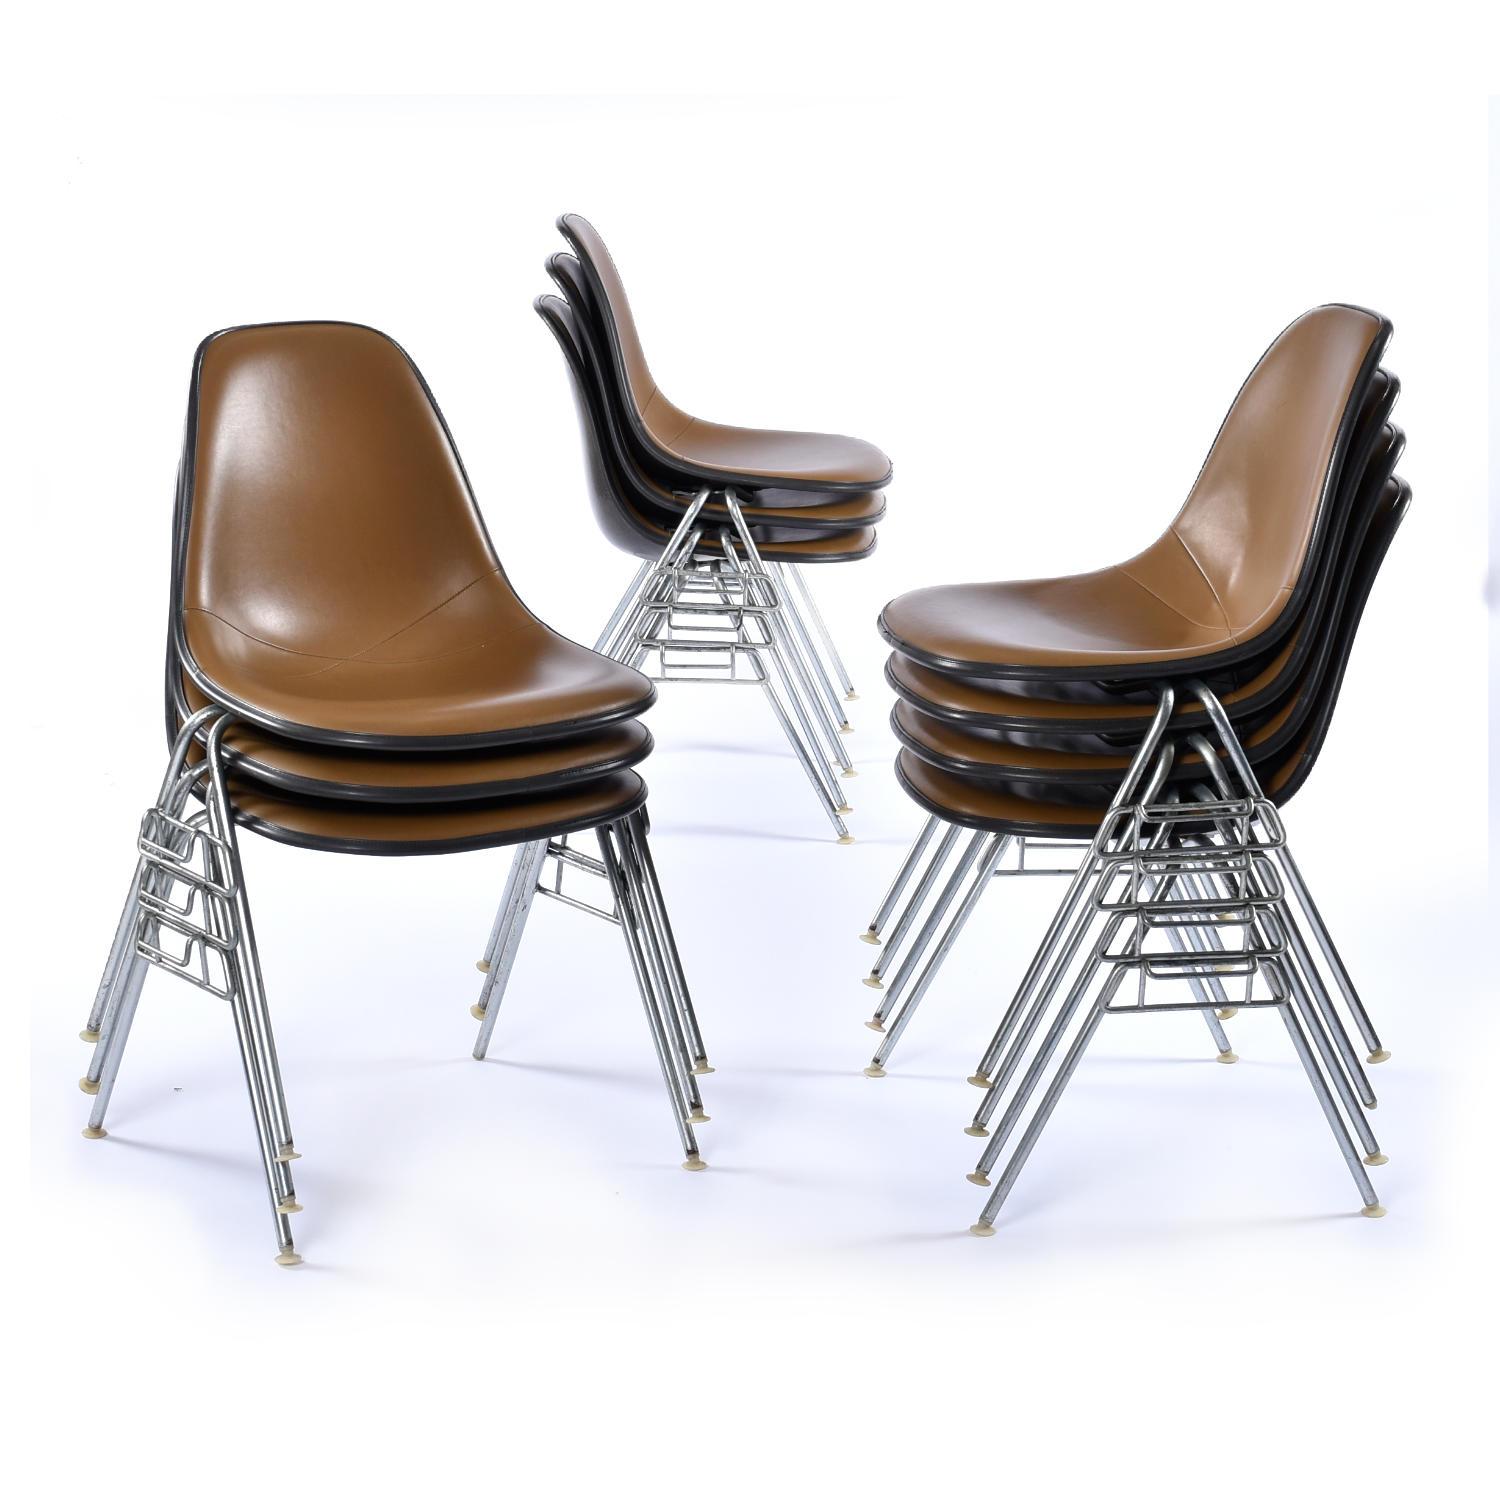 Sold individually, we have 20 chairs available. Contact us if you need a custom quote on larger quantities

Eames stackable fiberglass shell chairs with original brown naugahyde pads. The famous Charles and Ray Eames fiberglass shell chairs are